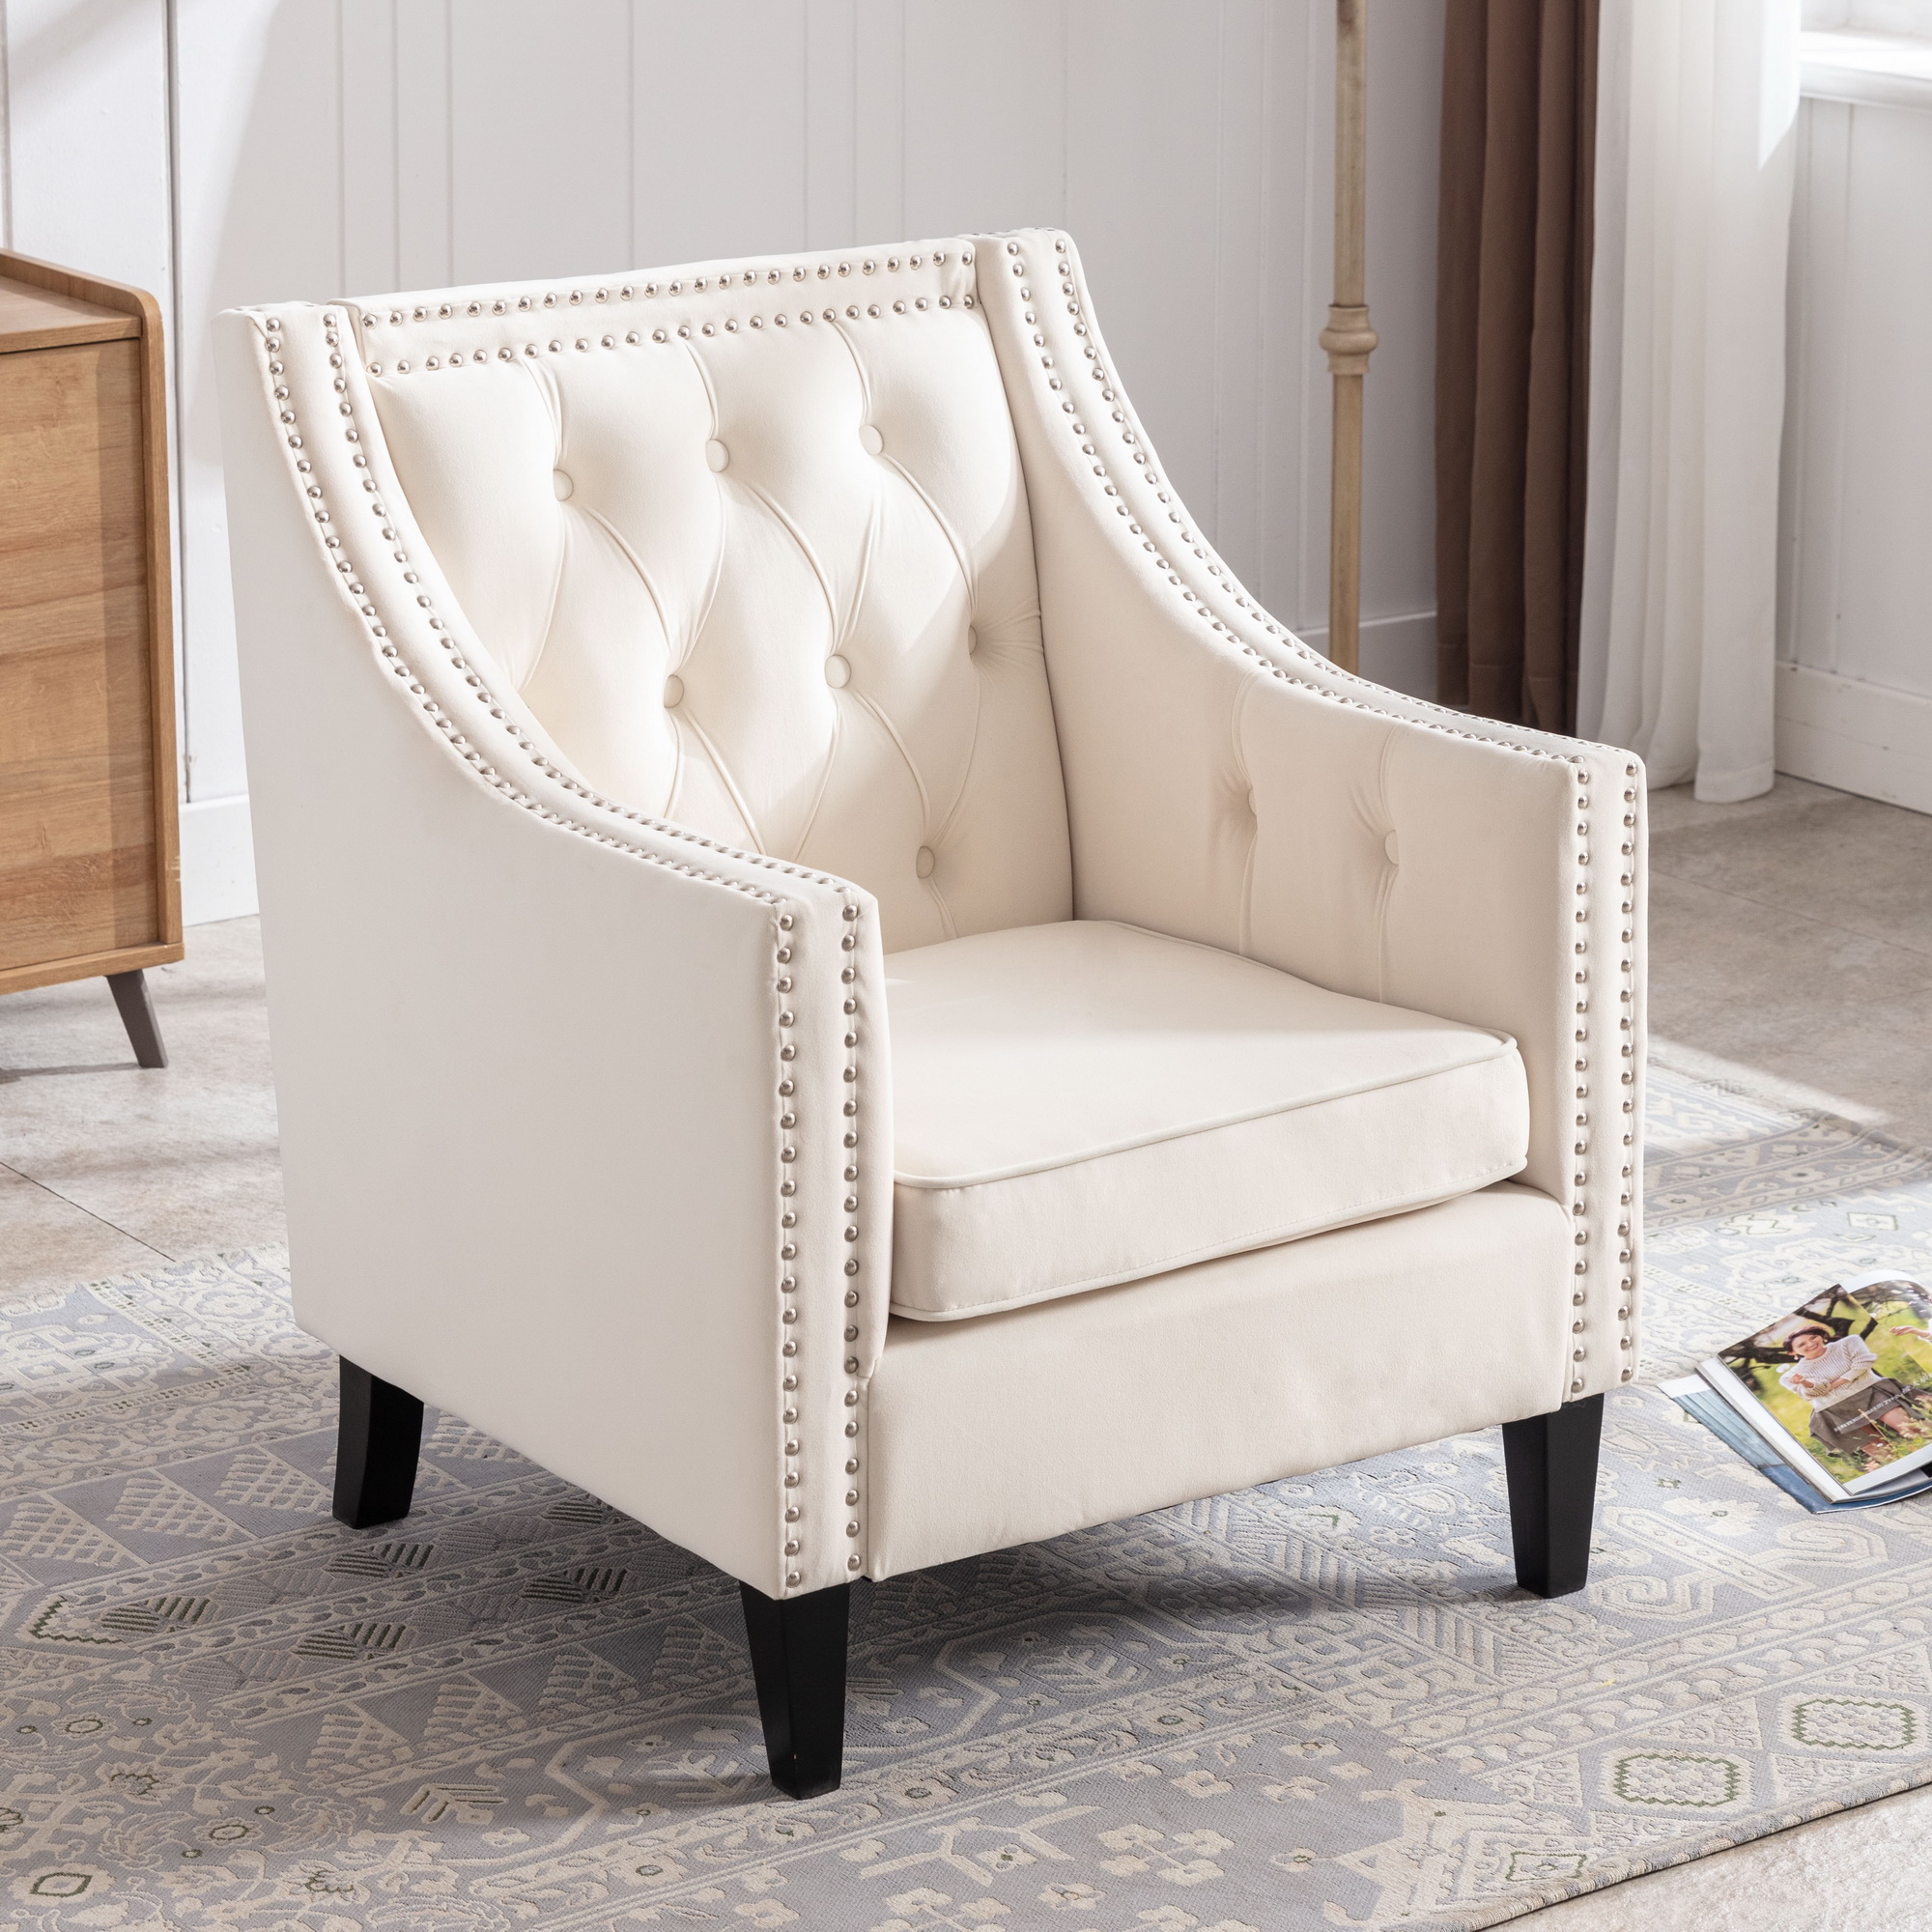 VESCASA Wingback Velvet Nailhead Trim Accent Arm Chair, Tufted Side Chair with Wood Legs